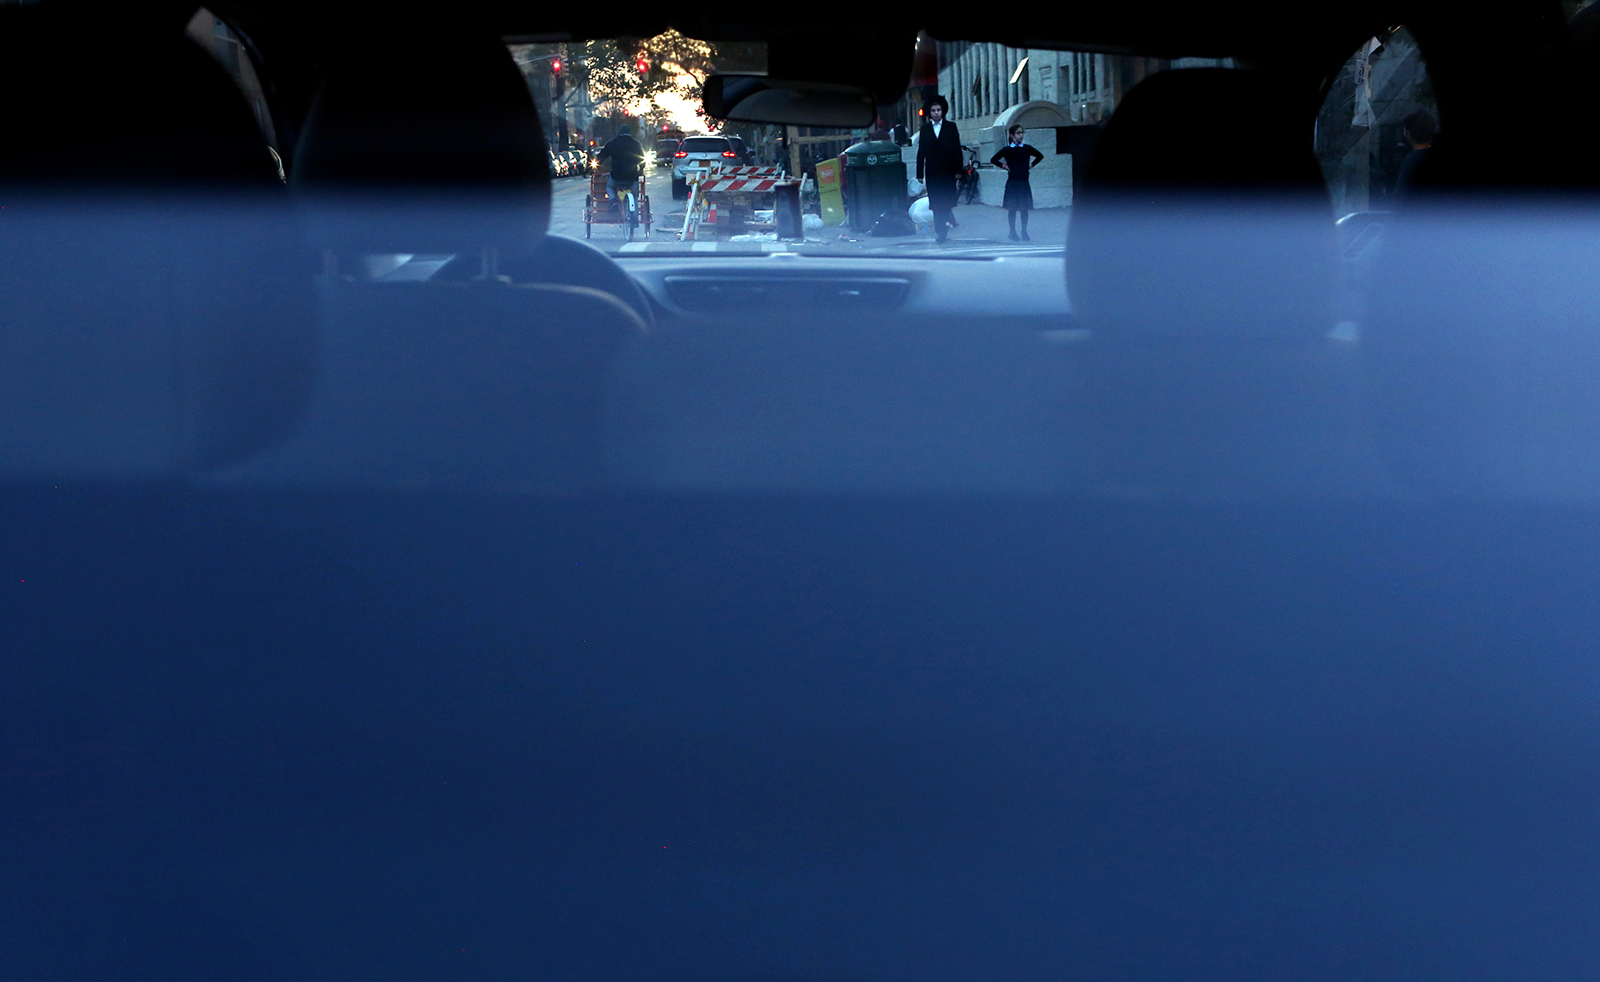 A boy and a girl are seen through a car's rear windshield in Borough Park in Brooklyn, New York on November 05, 2020. (Photo by: Yana Paskova for The New York Times/the National Geographic Society)